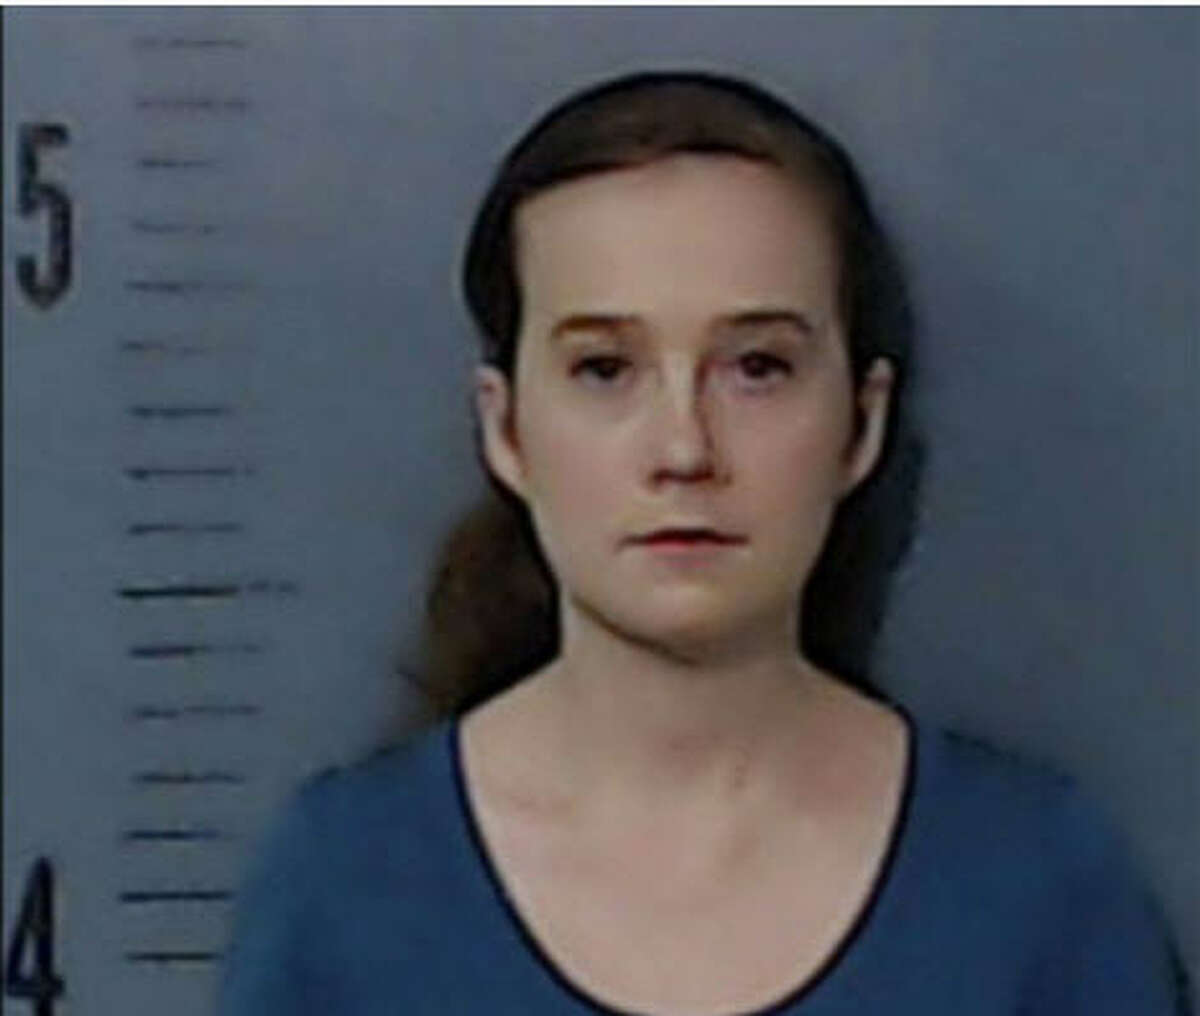 Kirsten Joelle Barnett, 25, a one-time teacher's aide in Abilene, is charged with biting a 4-year-old student who has autism. School officials say Barnett resigned after being placed on leave on April 17, 2017.